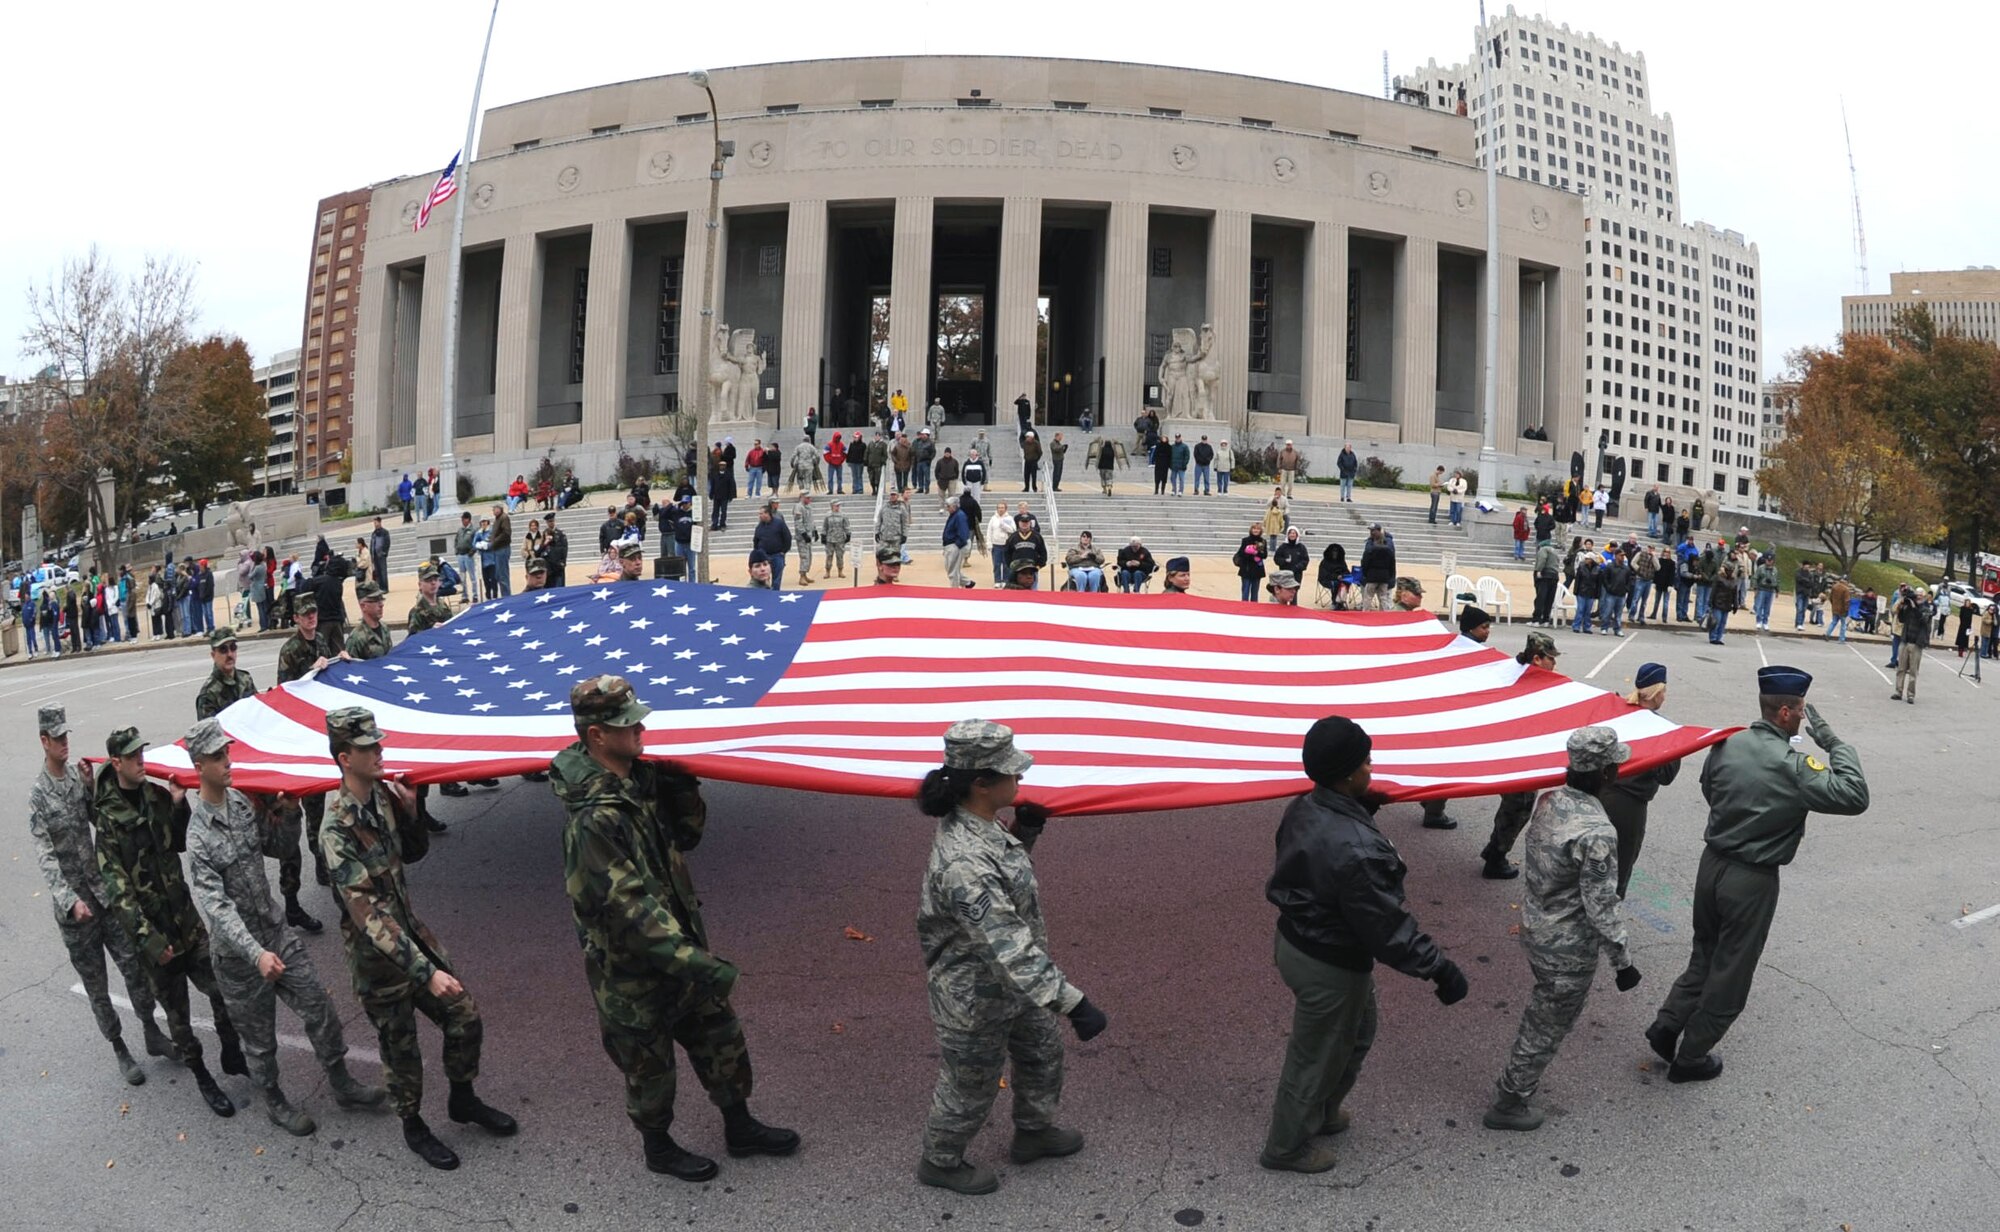 The Air Force Reserve Command Reservists of the 932nd Airlift Wing march the American flag through the streets of Saint Louis during the 2008 Veteran's Day parade.  Reservists come from 33 states to train with the wing located near Belleville, Ill.  Want to join or get more information?  Call 1-800-257-1212 in America.  (U.S. Air Force photo/Tech. Sgt. Gerald Sonnenberg)